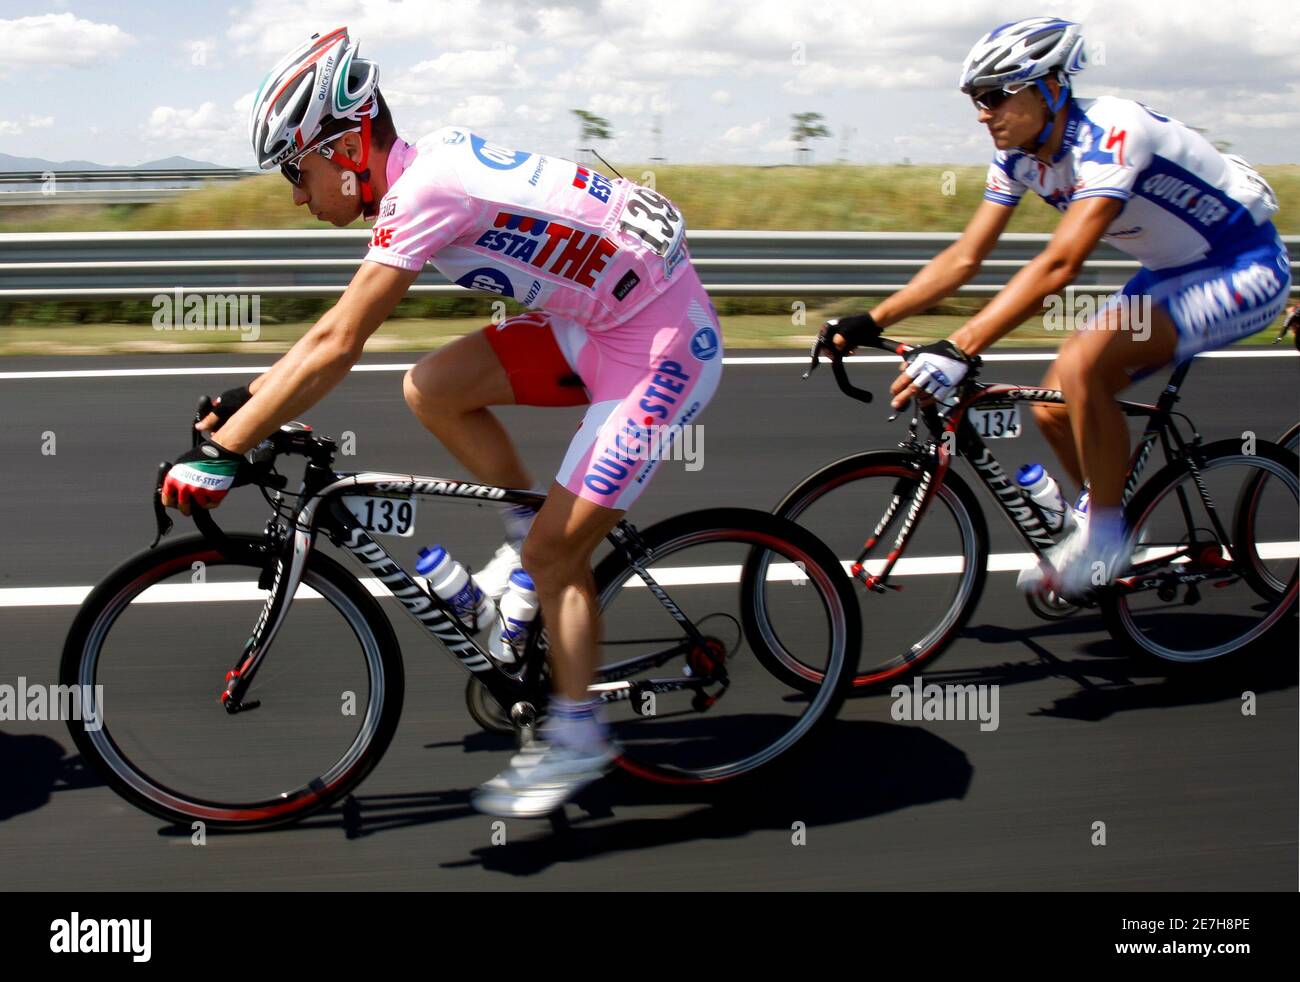 Italy's Giovanni Visconti (L), wearing the leader's pink jersey, cycles ahead of compatriot Mauro Facci during the ninth stage of the Giro d'Italia cycling race 218-km from Civitavecchia to San Vincenzo May 18, 2008.  REUTERS/Giampiero Sposito (ITALY) Stock Photo